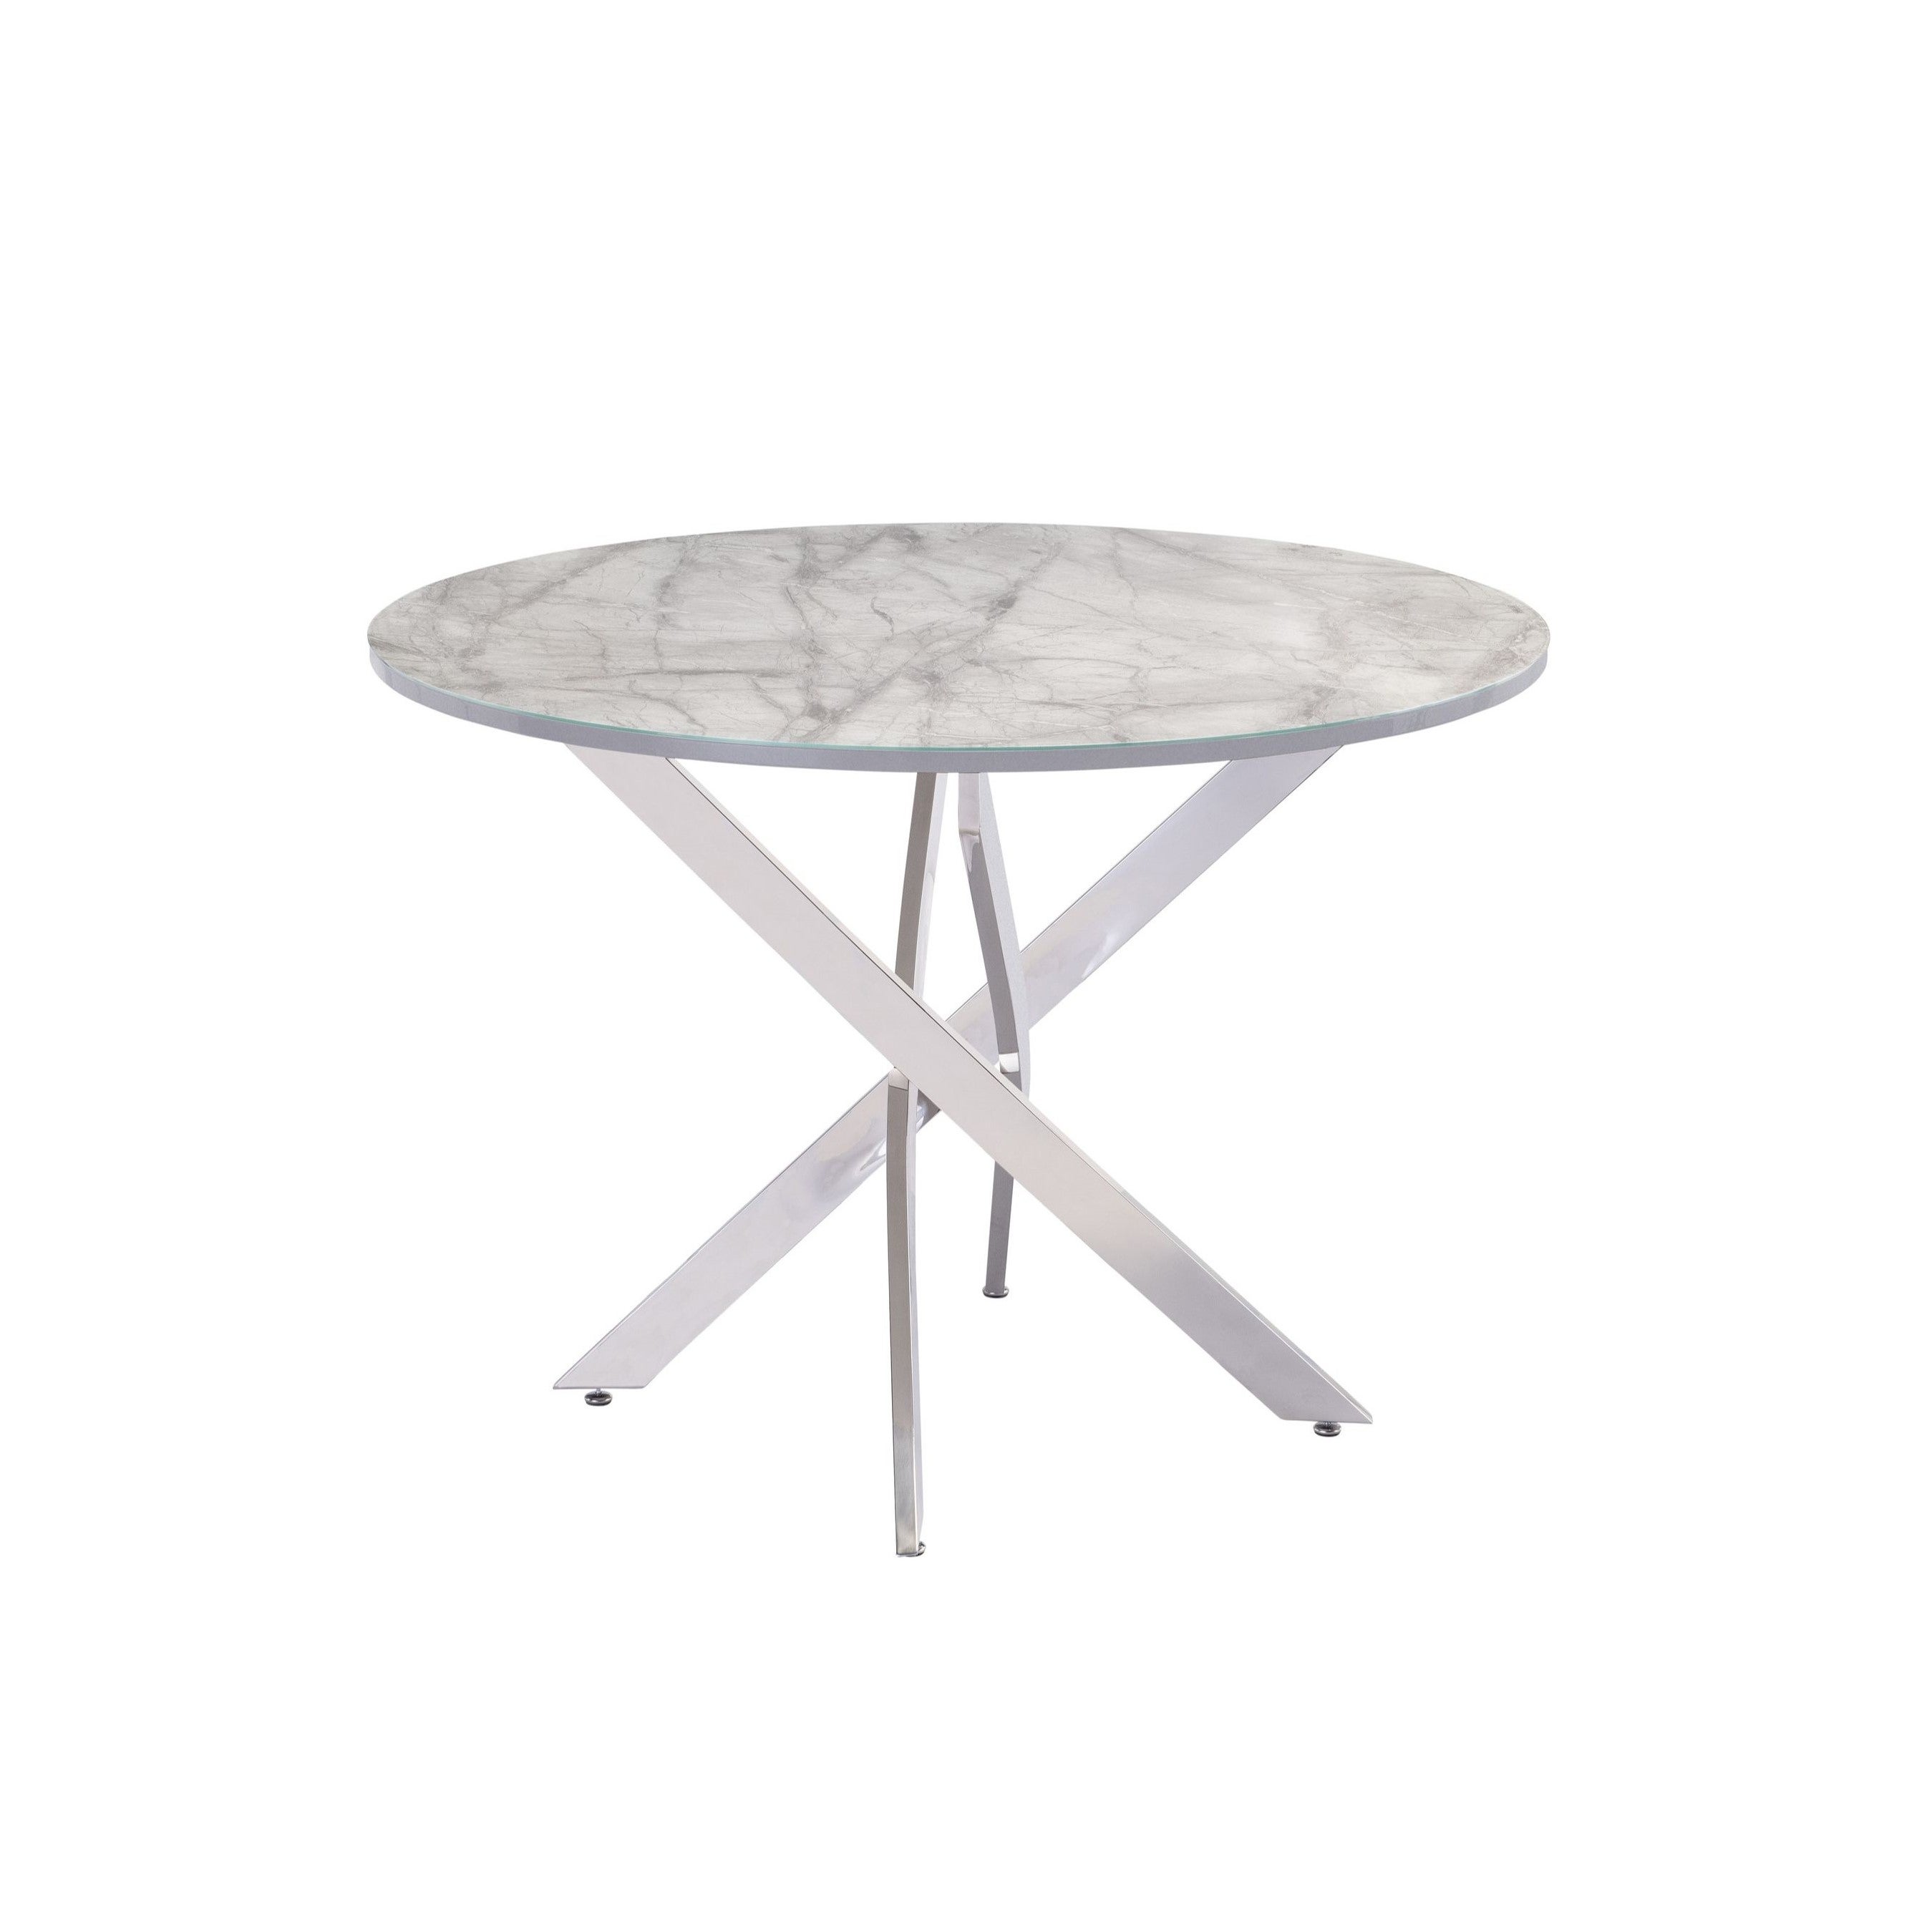 Alden 4 Seater Round Glass Top Dining Table Marble Effect Grey